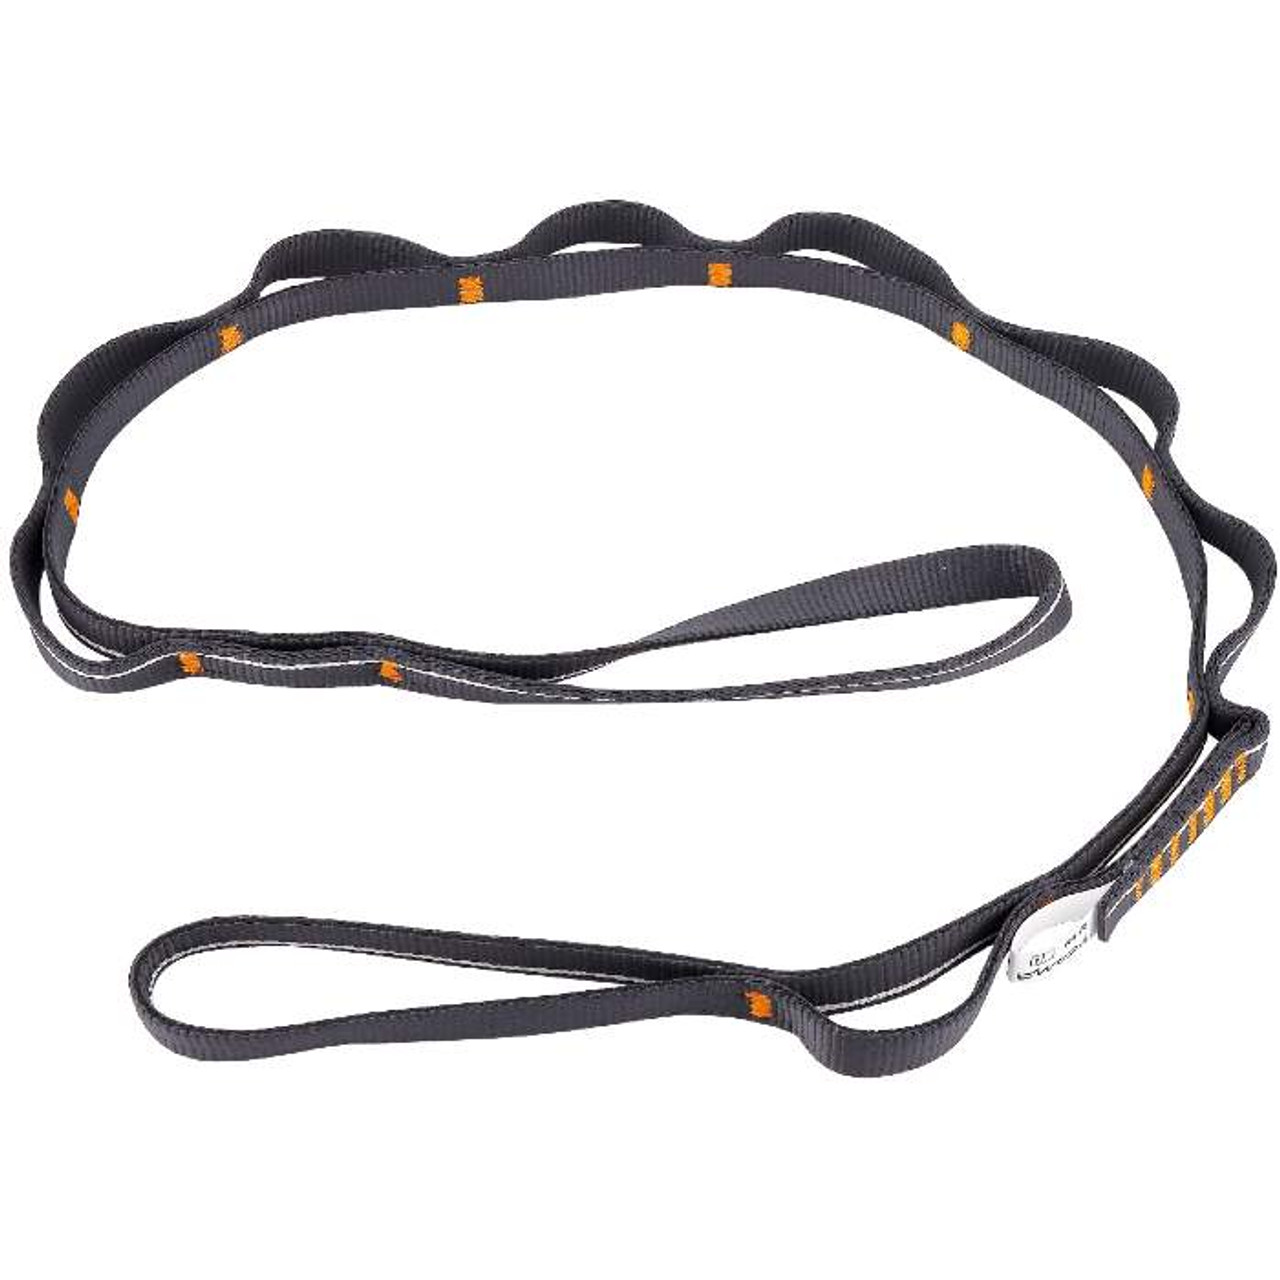 16 mm Nylon daisy chain with standard construction. Available in 2 lengths (48 and 54 inches, 122 and 137 cm). The bottom loop has a twist so that it girth hitches cleanly to a climbing harness.
NOTE: never cross-clip two loops of a daisy chain — full strength comes from the main bartack and not the individual loop stitches.